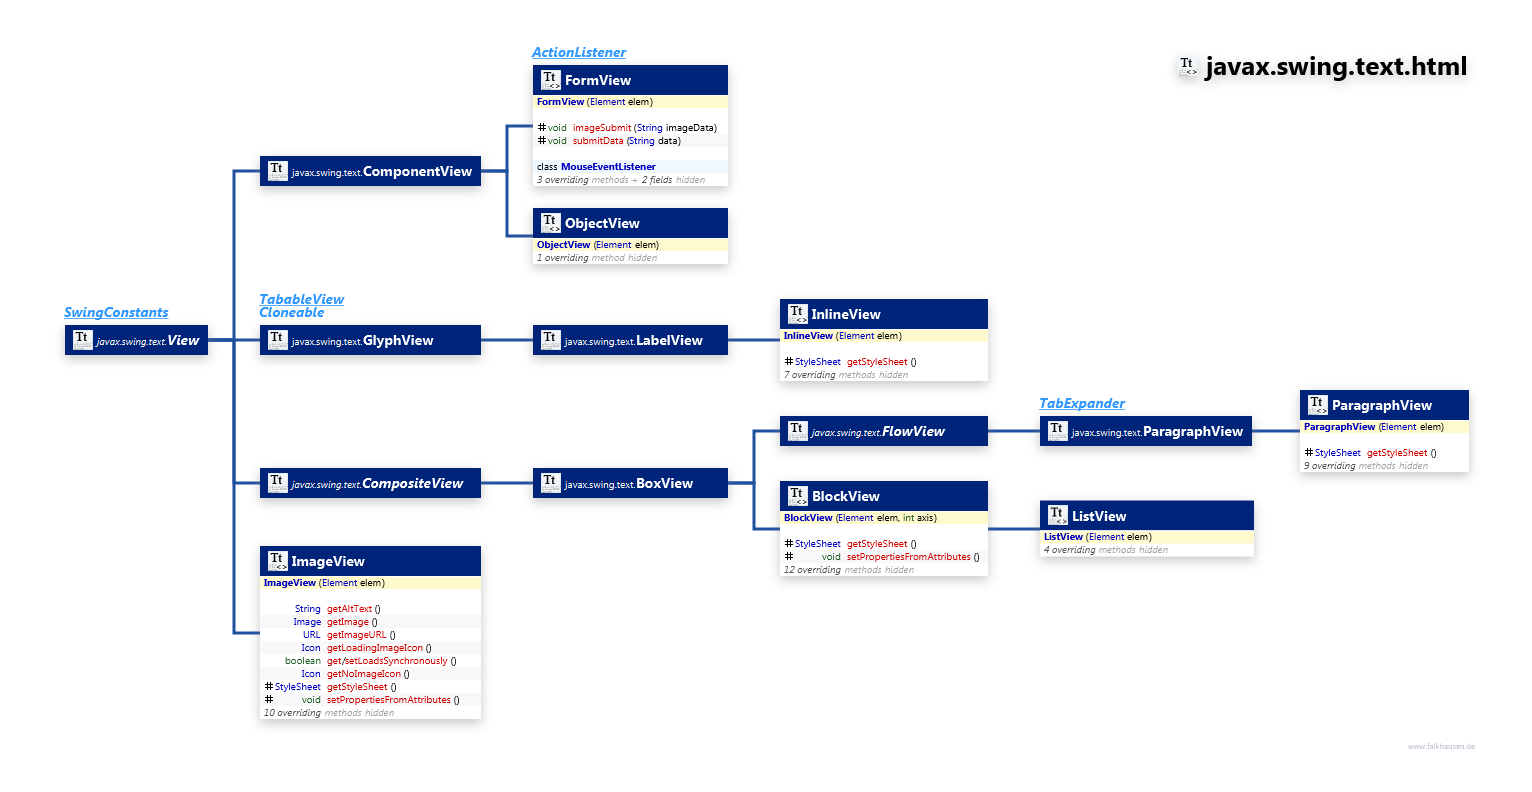 javax.swing.text.html Views class diagram and api documentation for Java 7